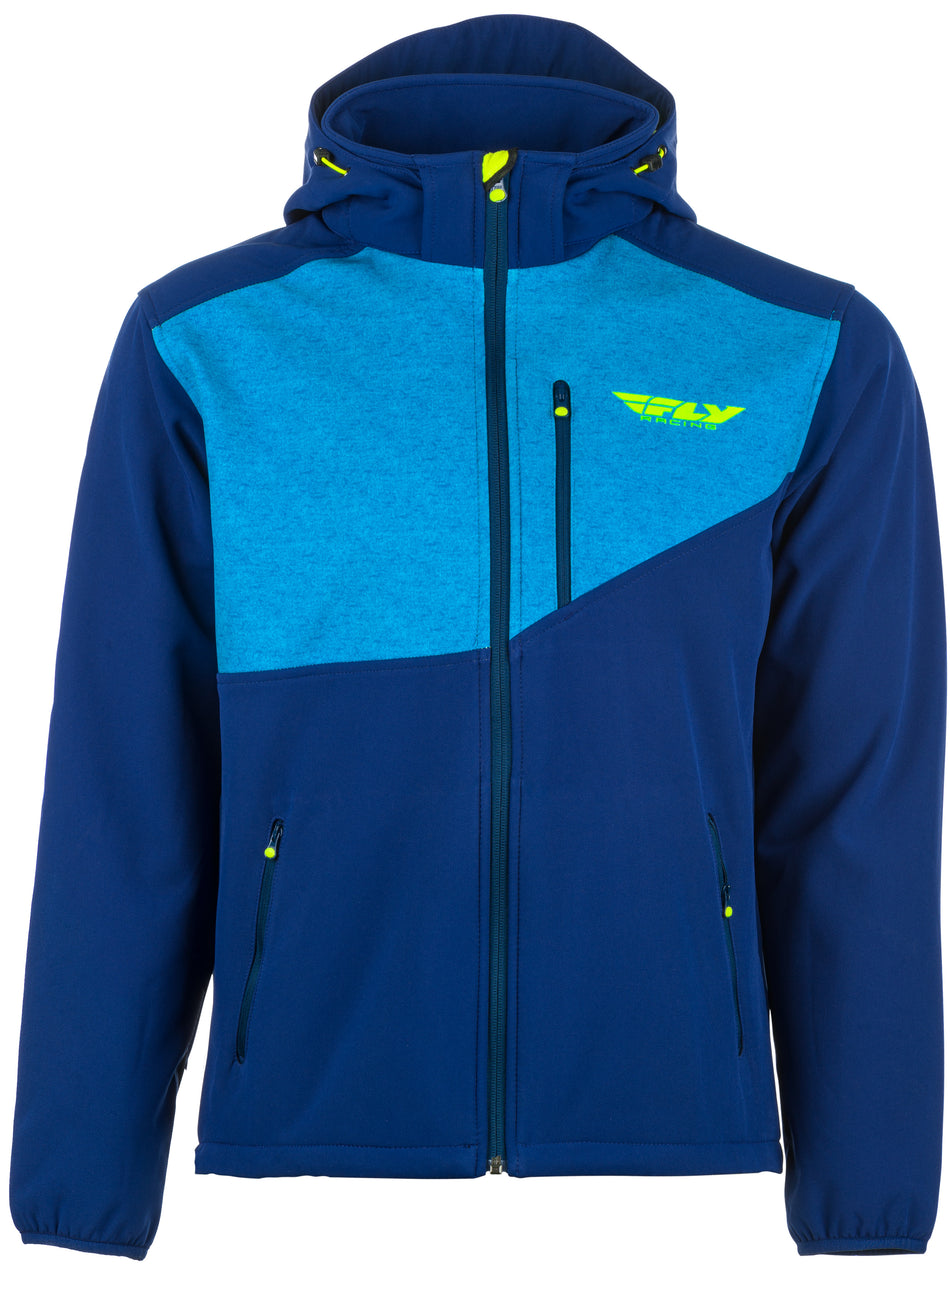 FLY RACING Fly Checkpoint Jacket Blue/Hi-Vis Md 354-6381M